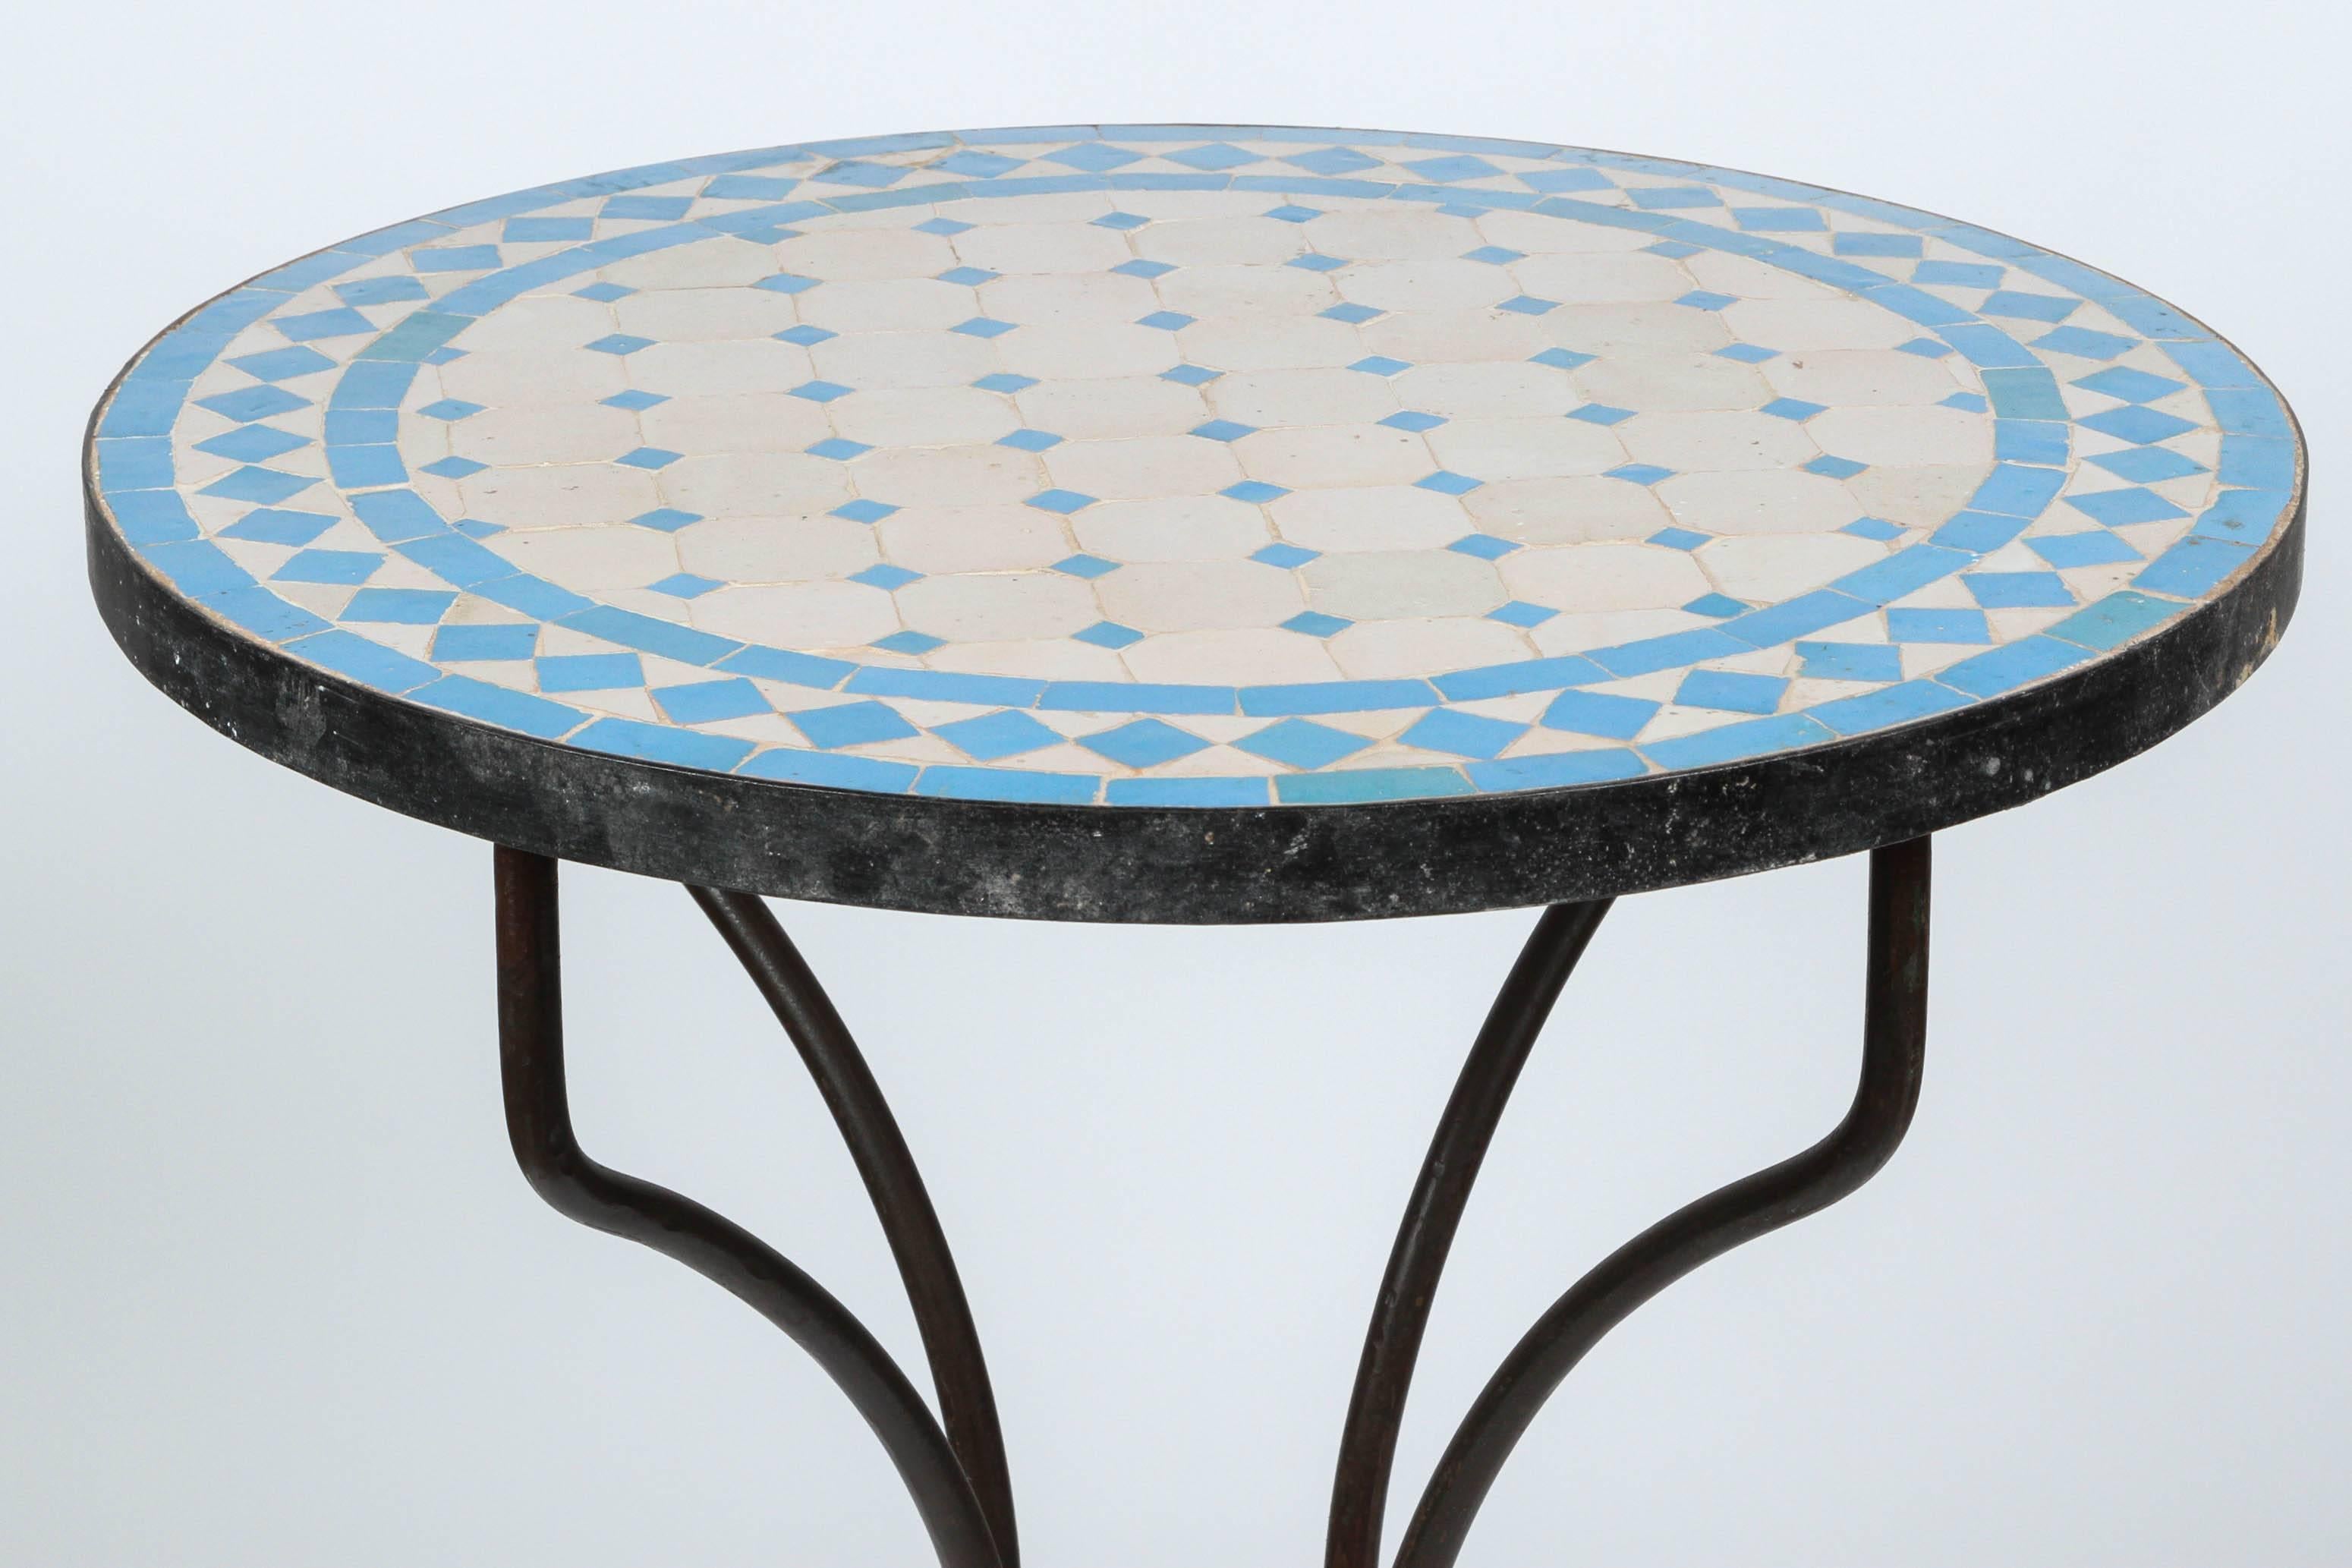 Hand-Carved Moroccan Mosaic Blue Tile Bistro Table on Iron Base